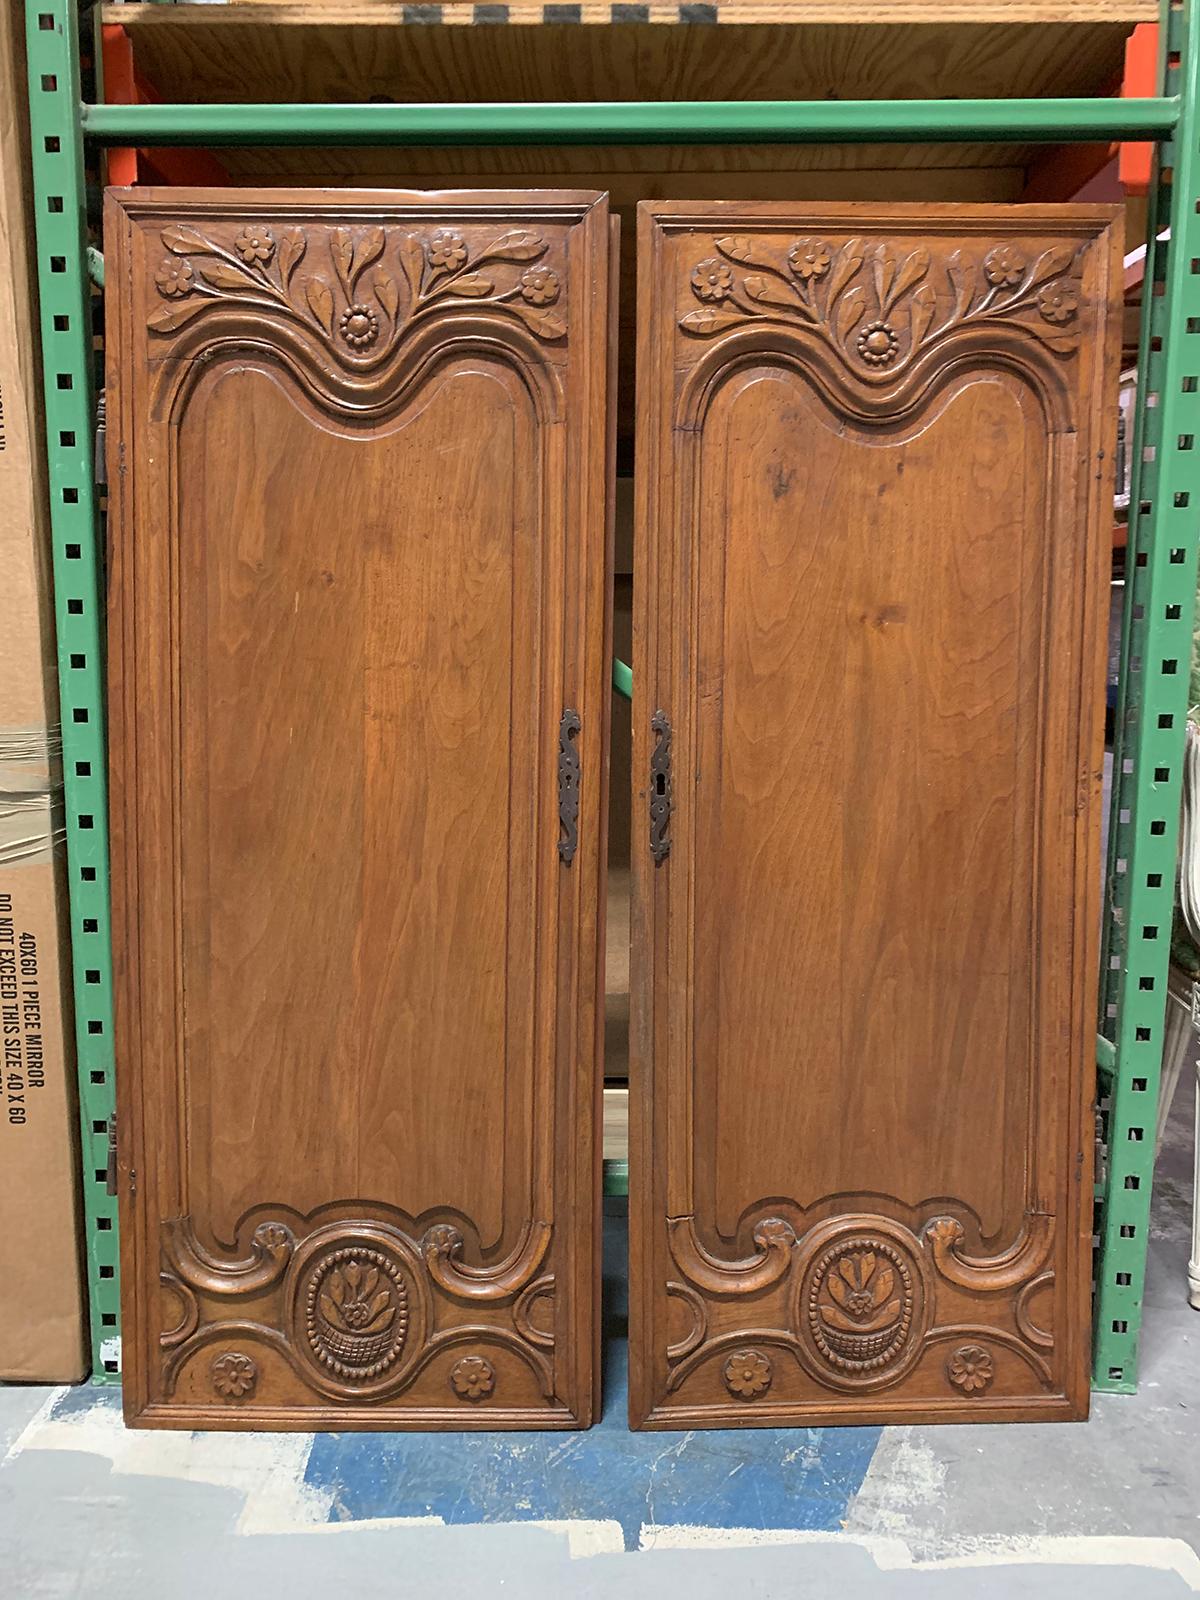 Pair of 18th-19th century French carved doors.